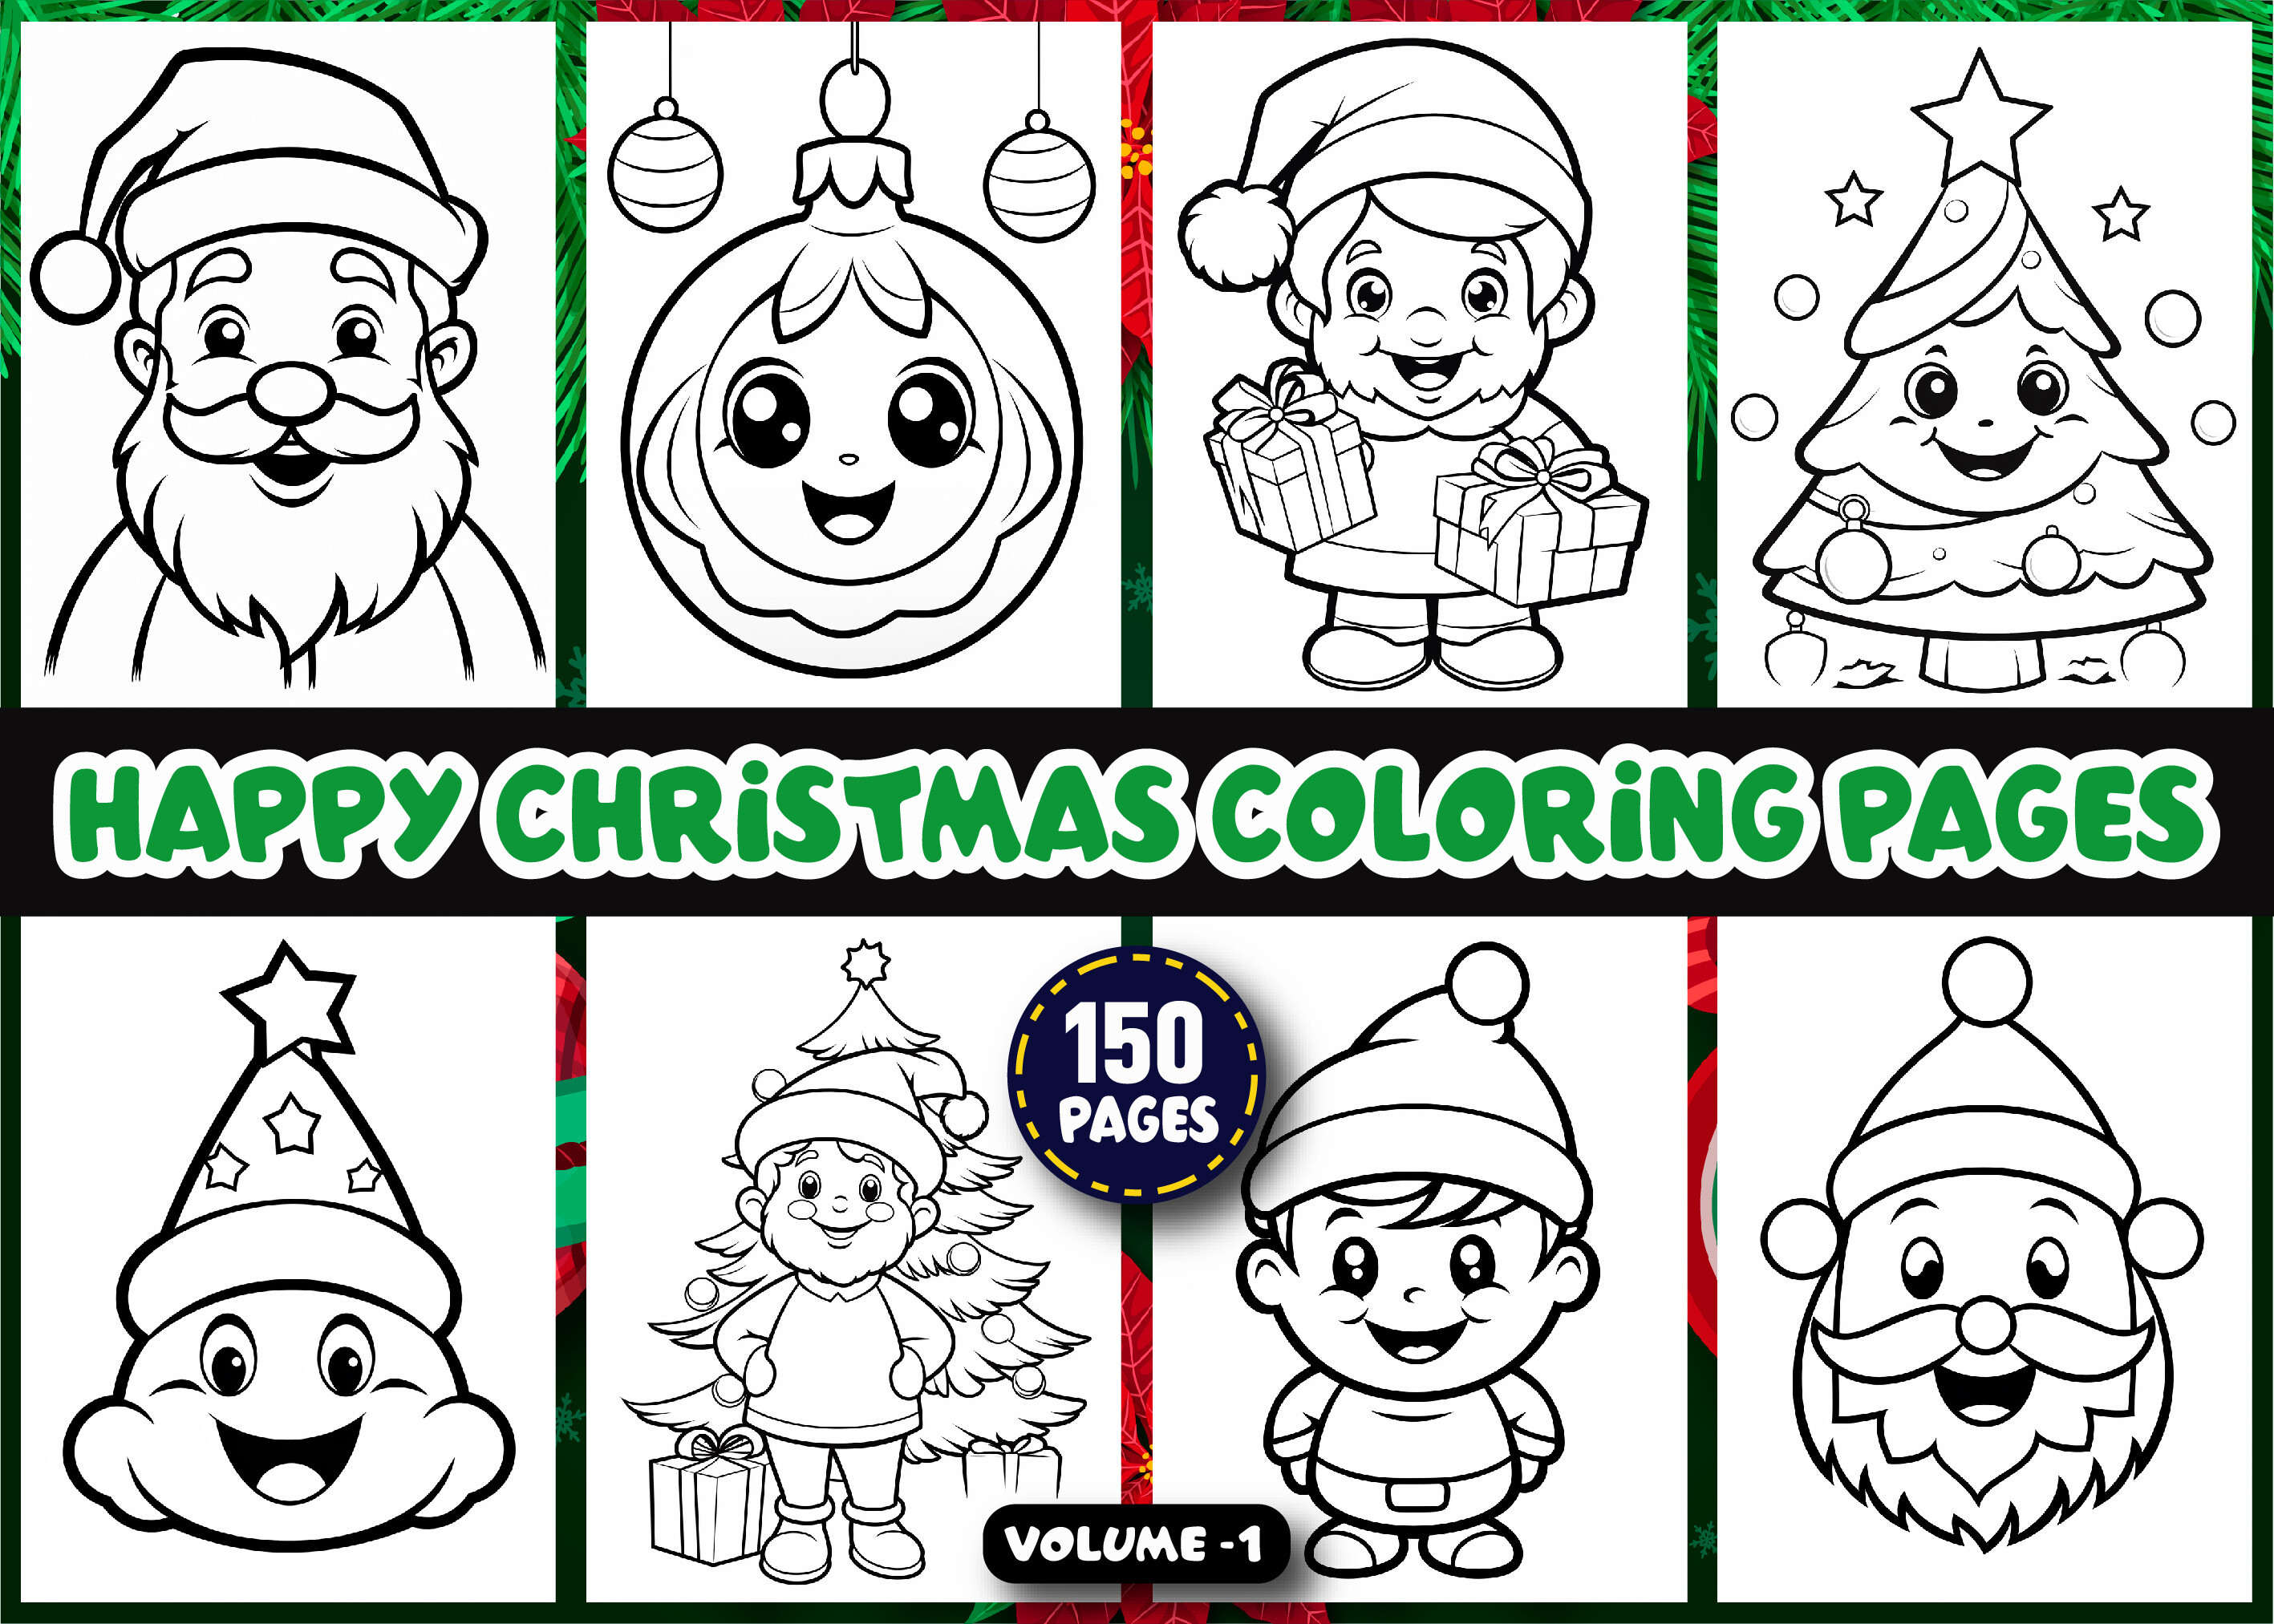 180 Coloring/Tracing Pages ideas  coloring pages, coloring books, coloring  book pages